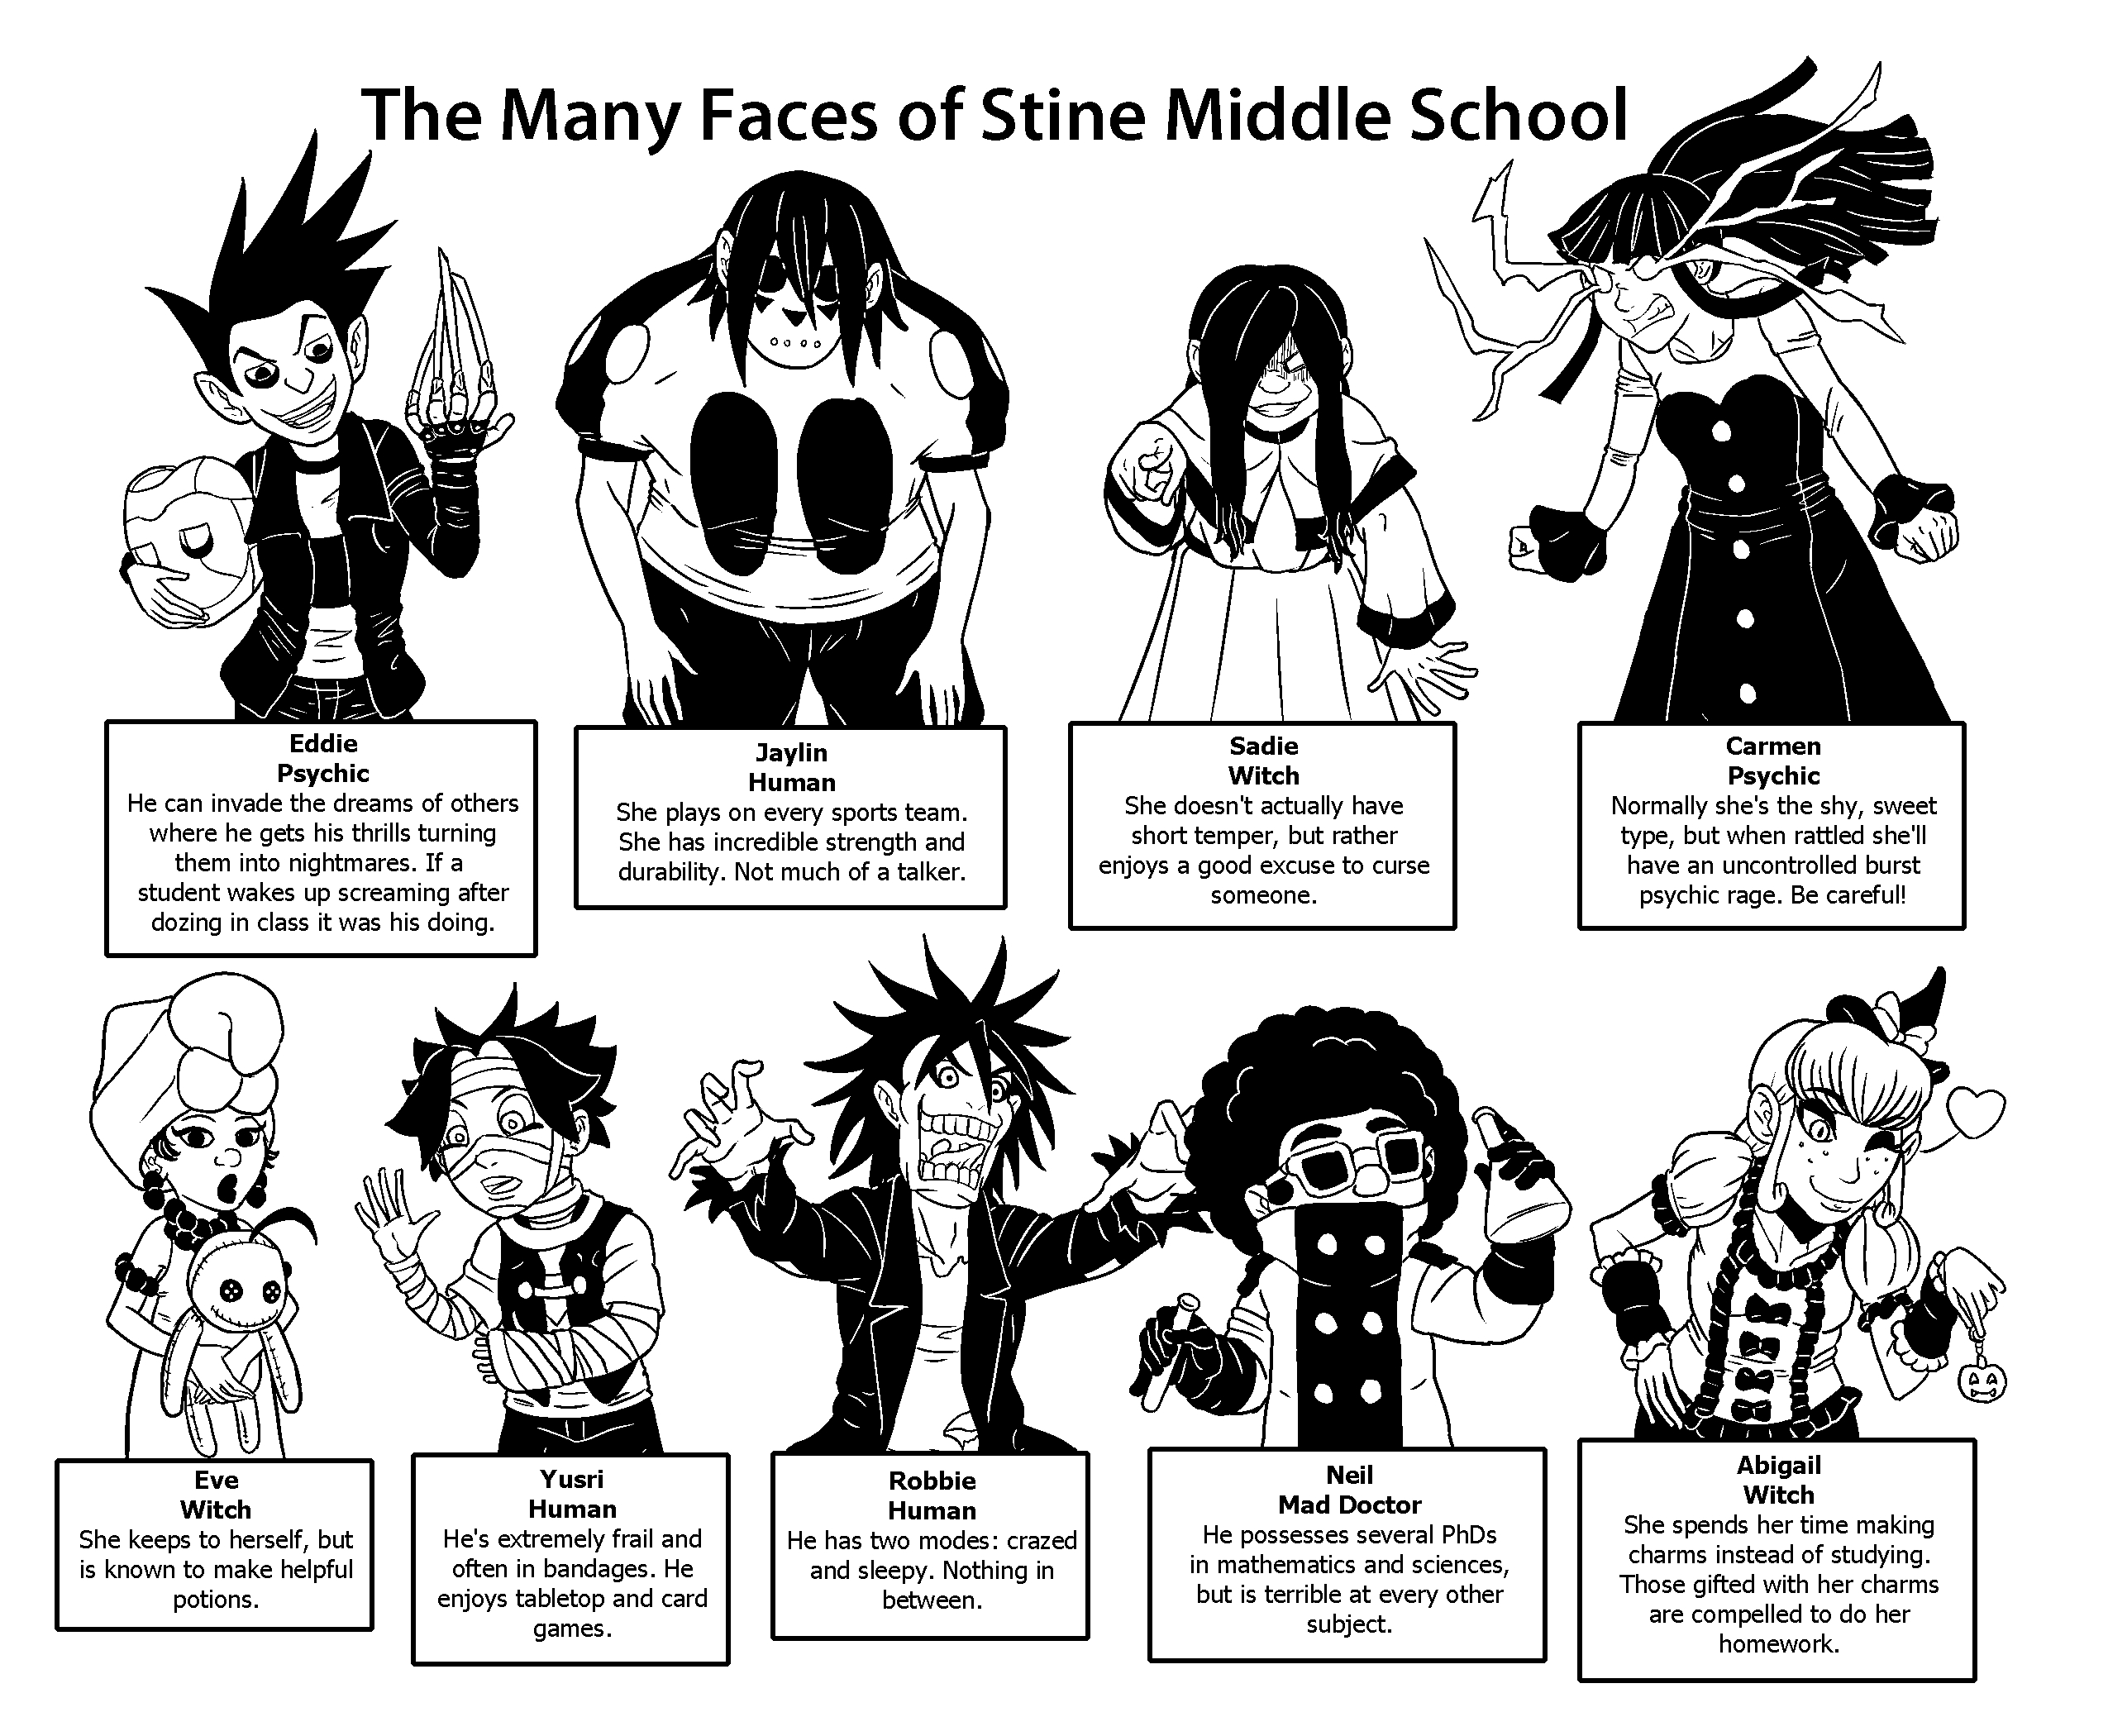 The Faces of Stine MS 2